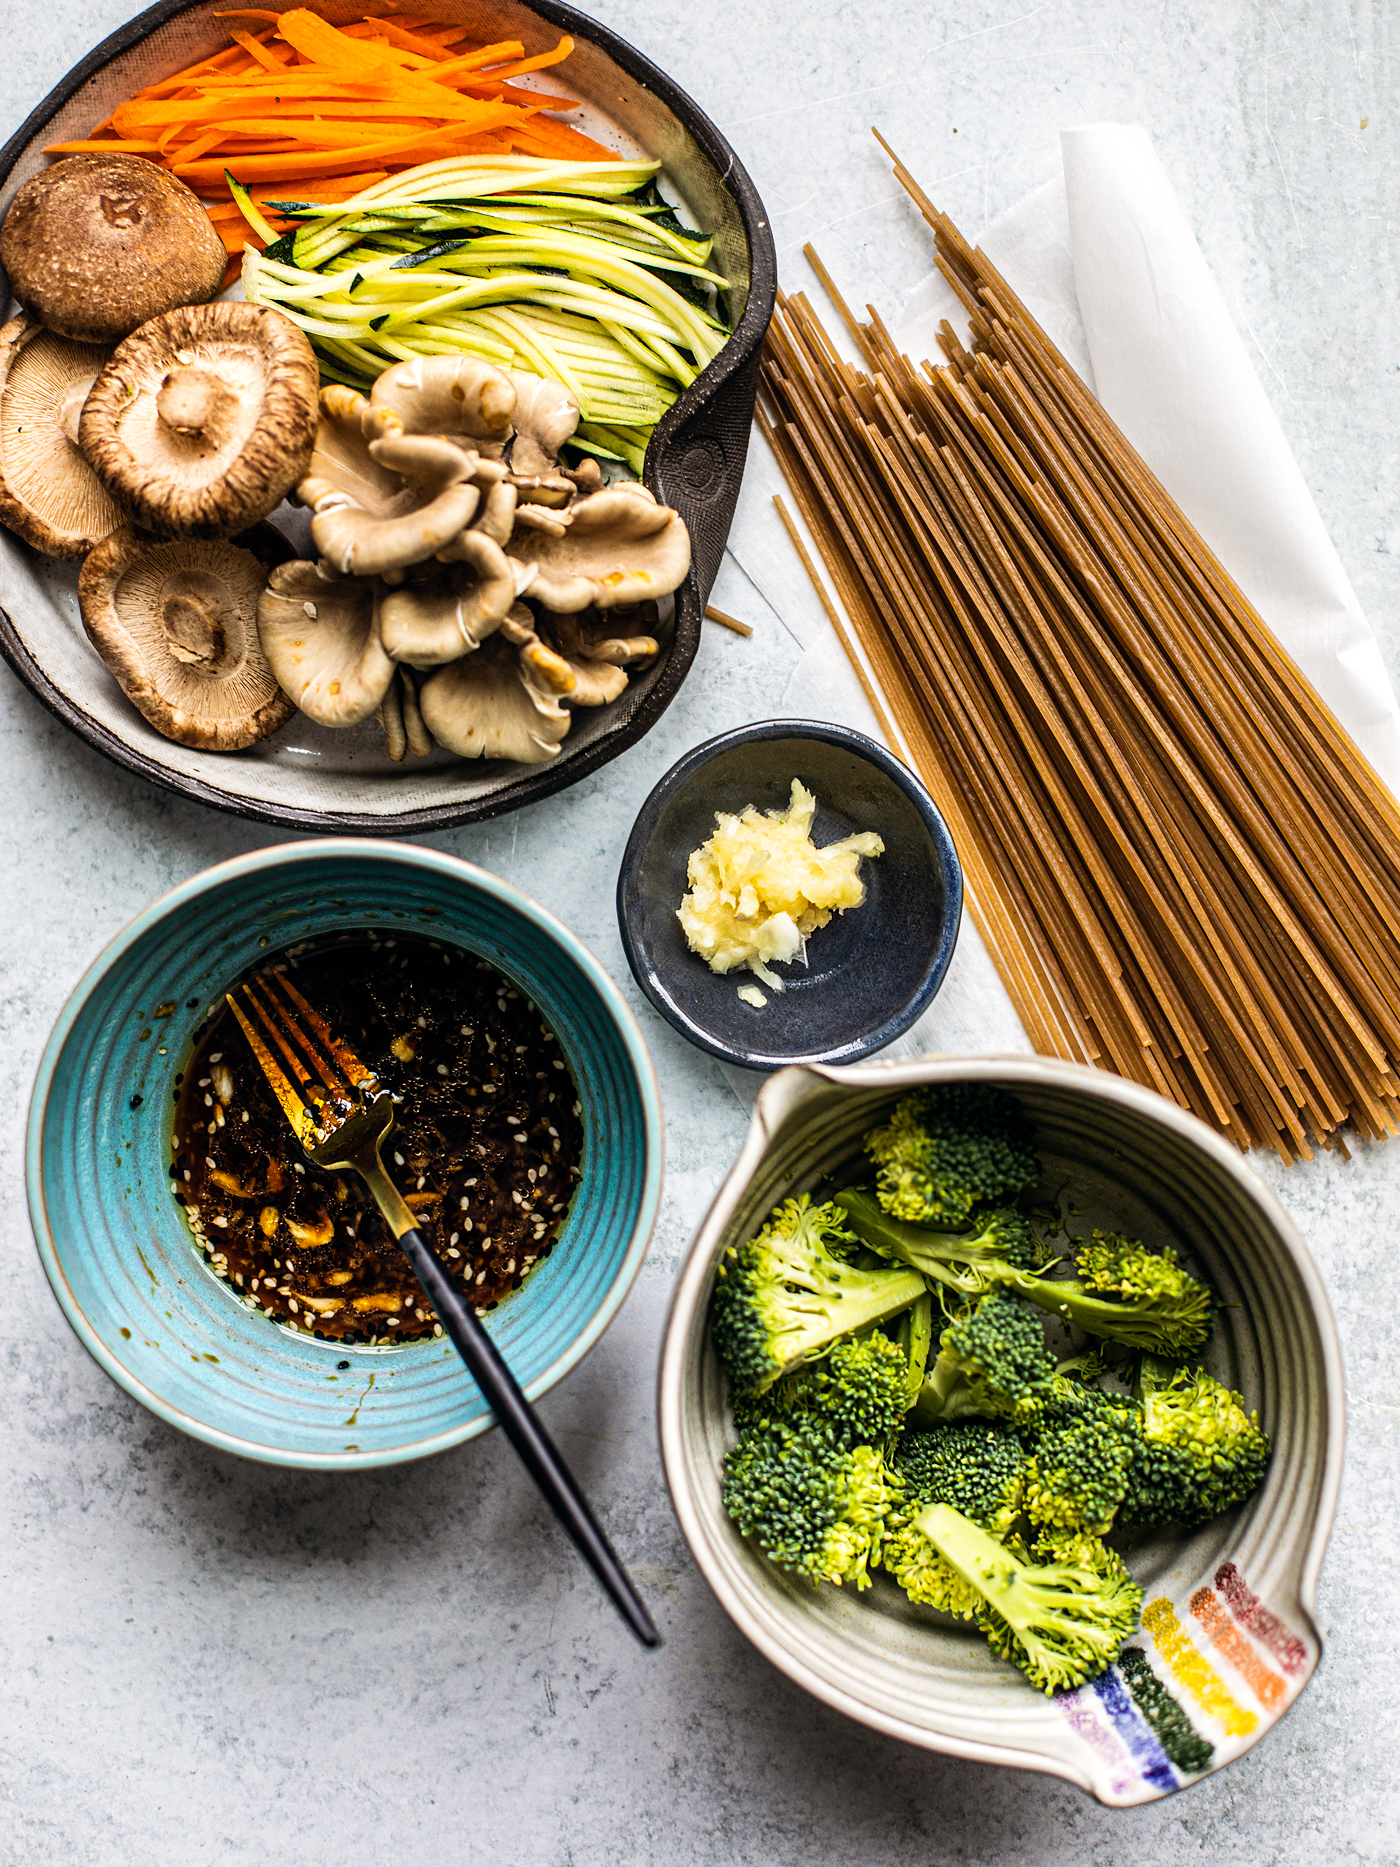 Flatlay shot of uncooked soba noodles, vegetables, and sauce in a mixing bowl.